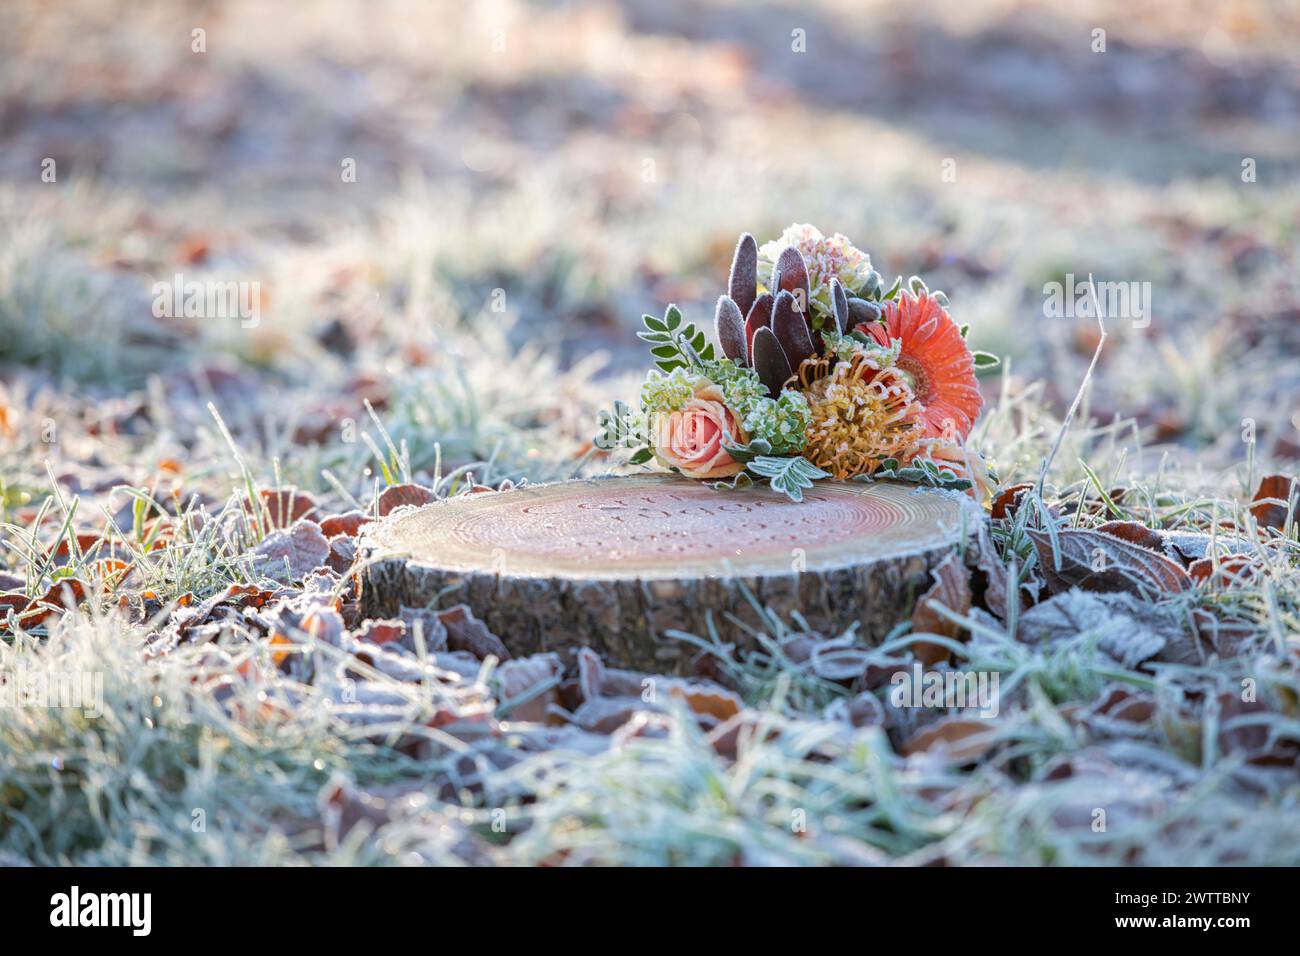 Frostkissed flowers and cookies on a tree stump in a winter morning. Stock Photo